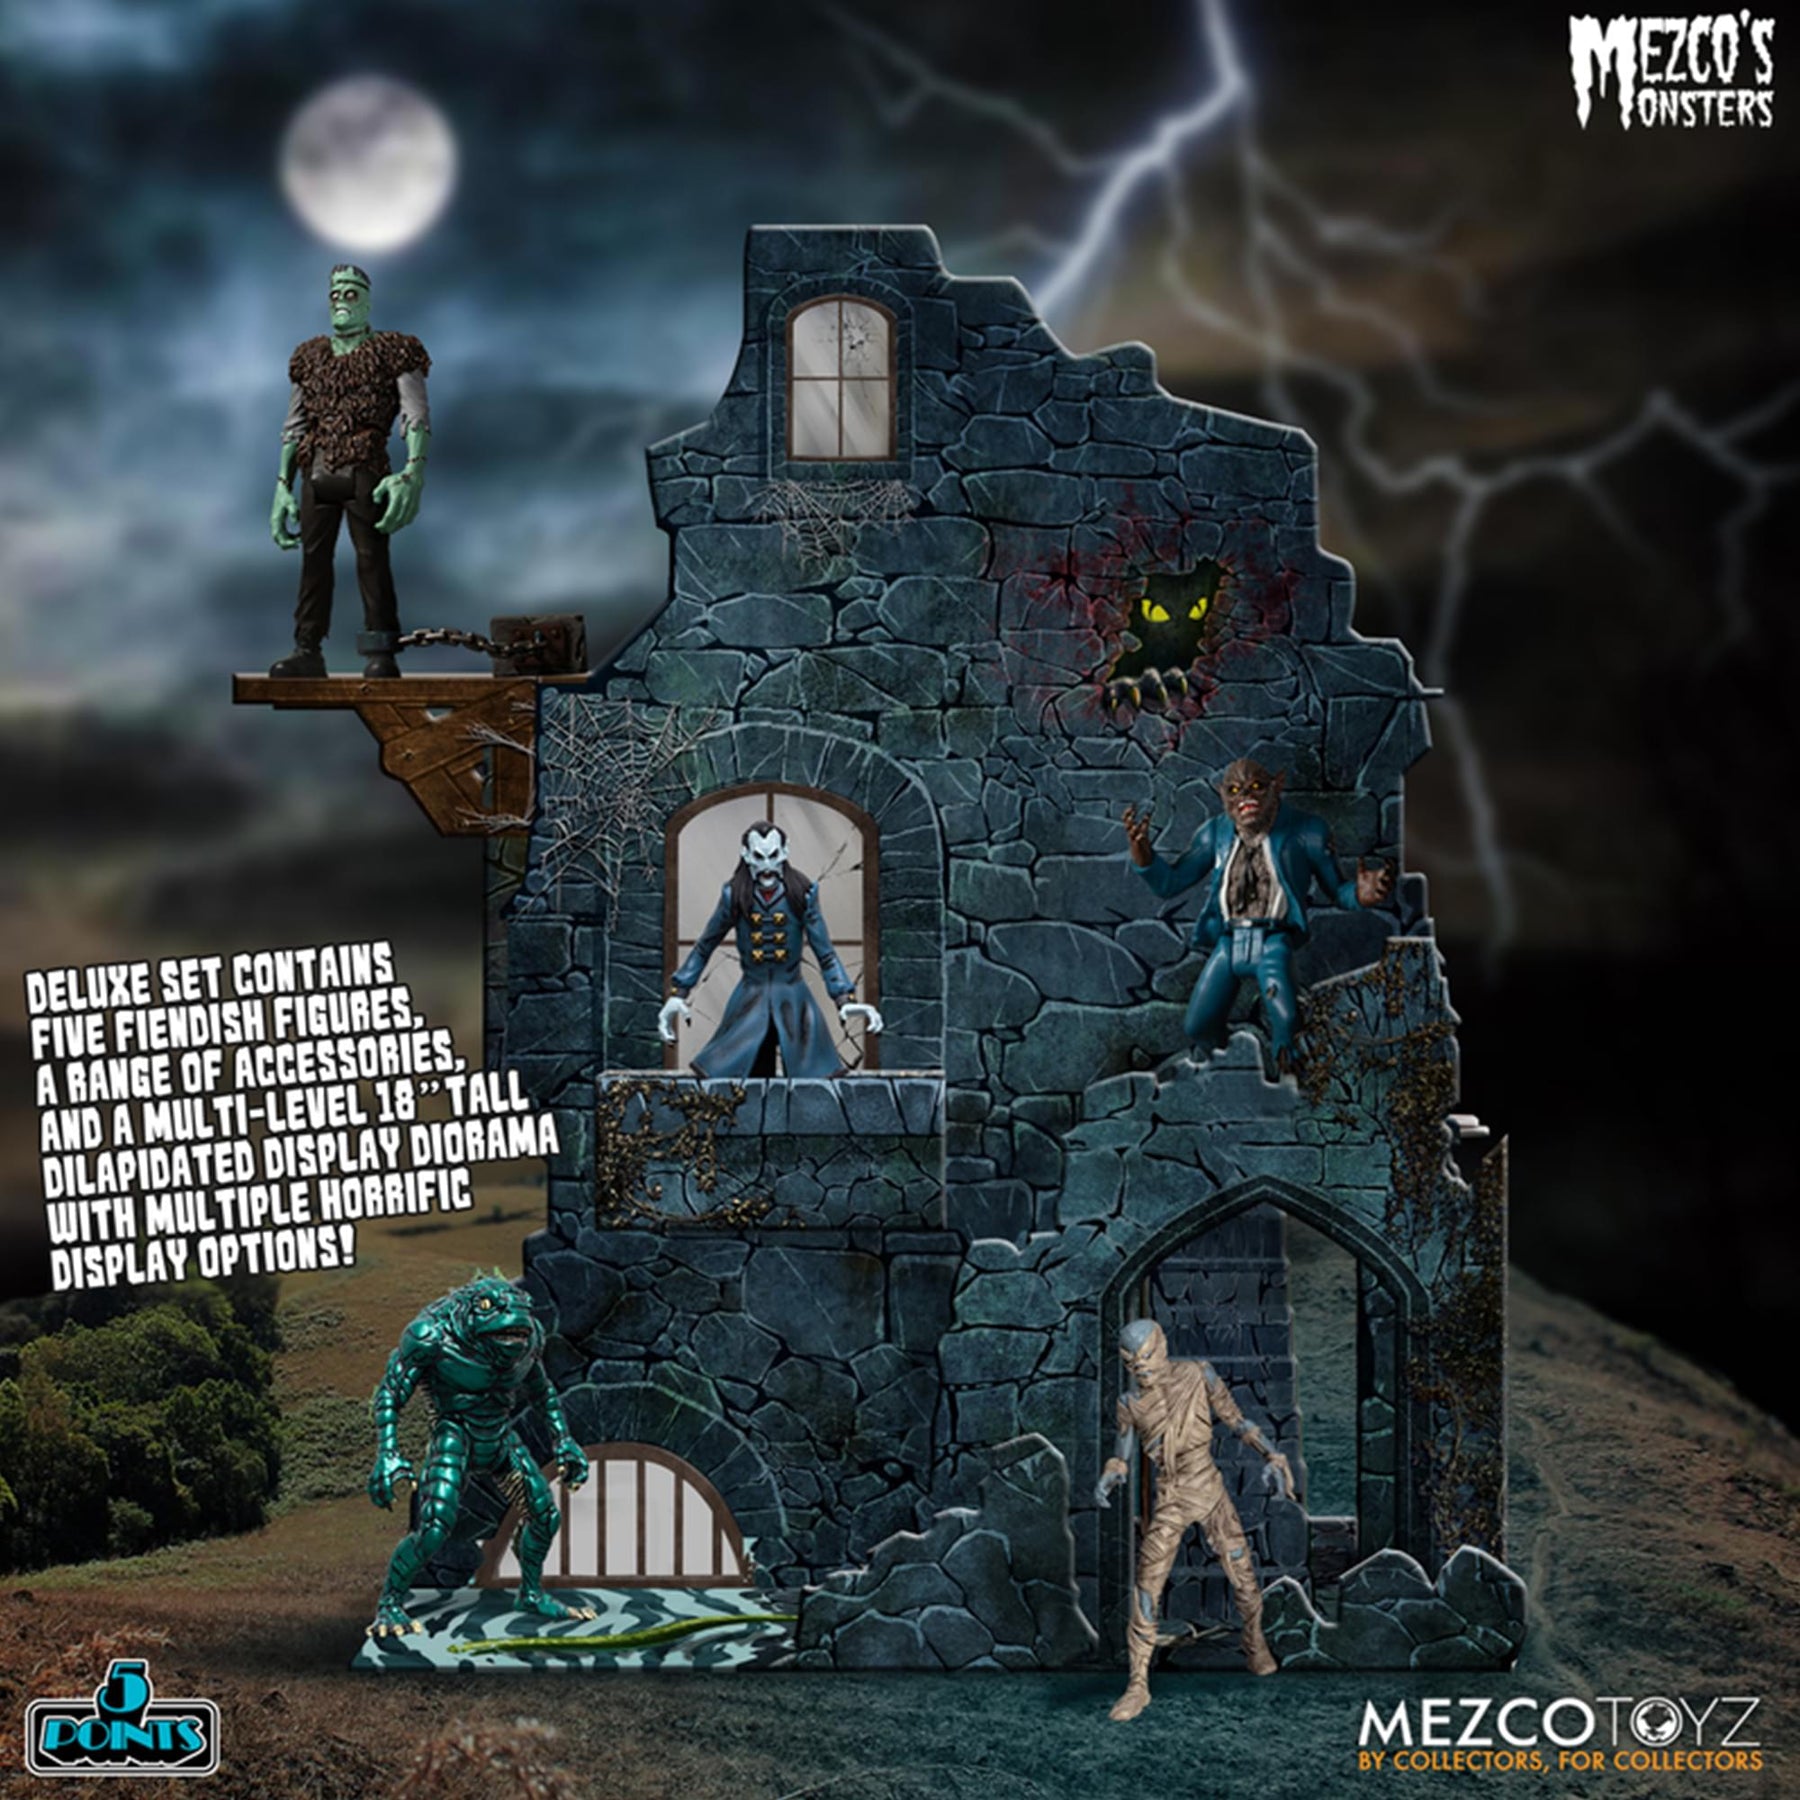 5 Points Mezco’s Monsters Tower of Fear Deluxe Boxed Set